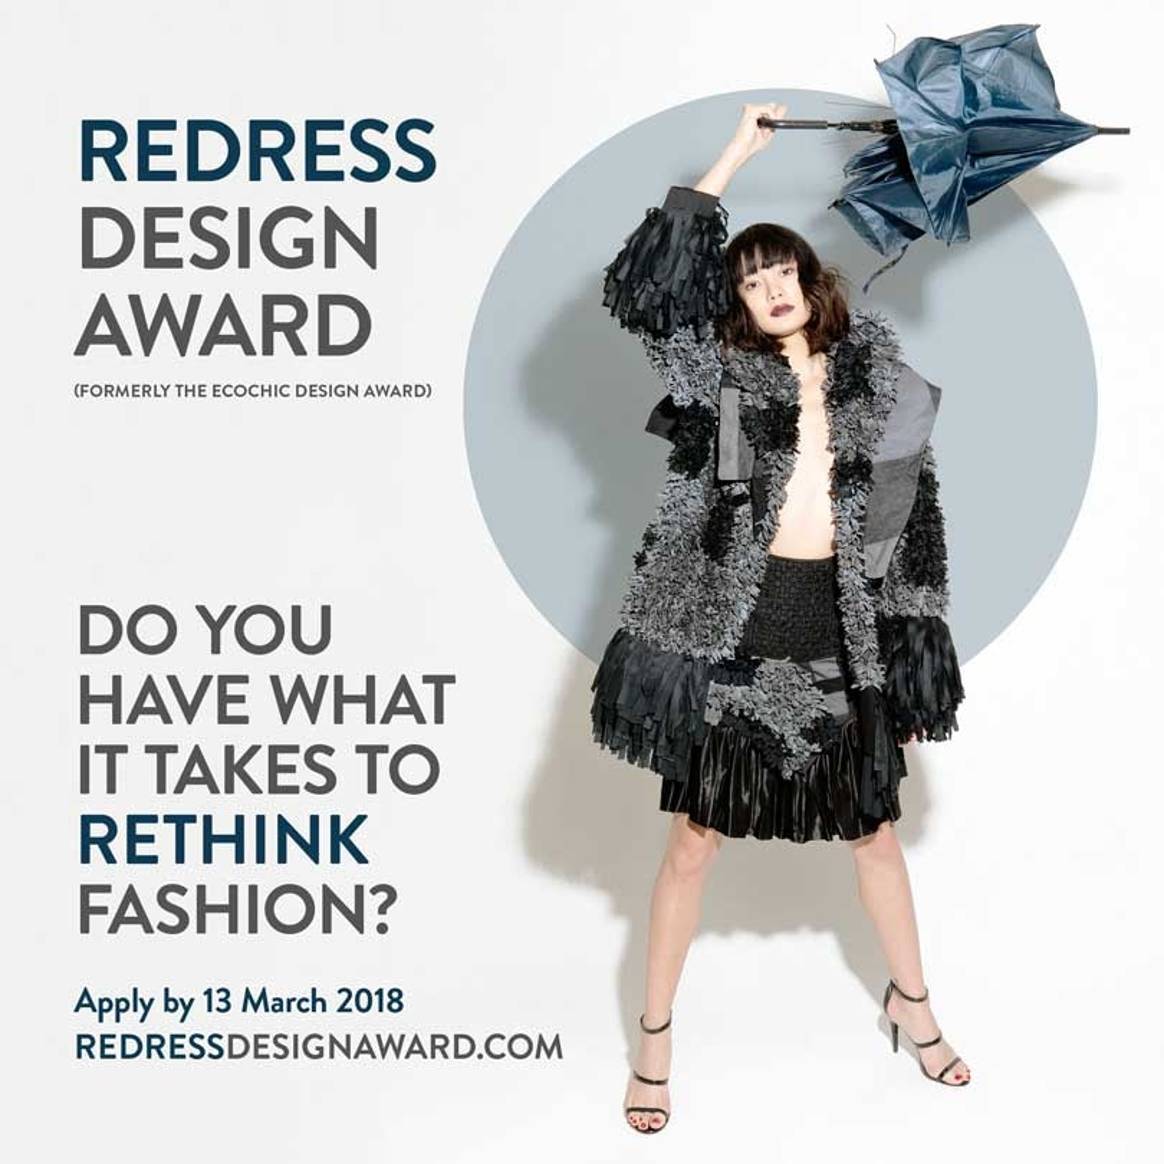 Global expansion of Redress Design Award feeds urgent need to embed sustainability into the fashion industry as a economic necessity.